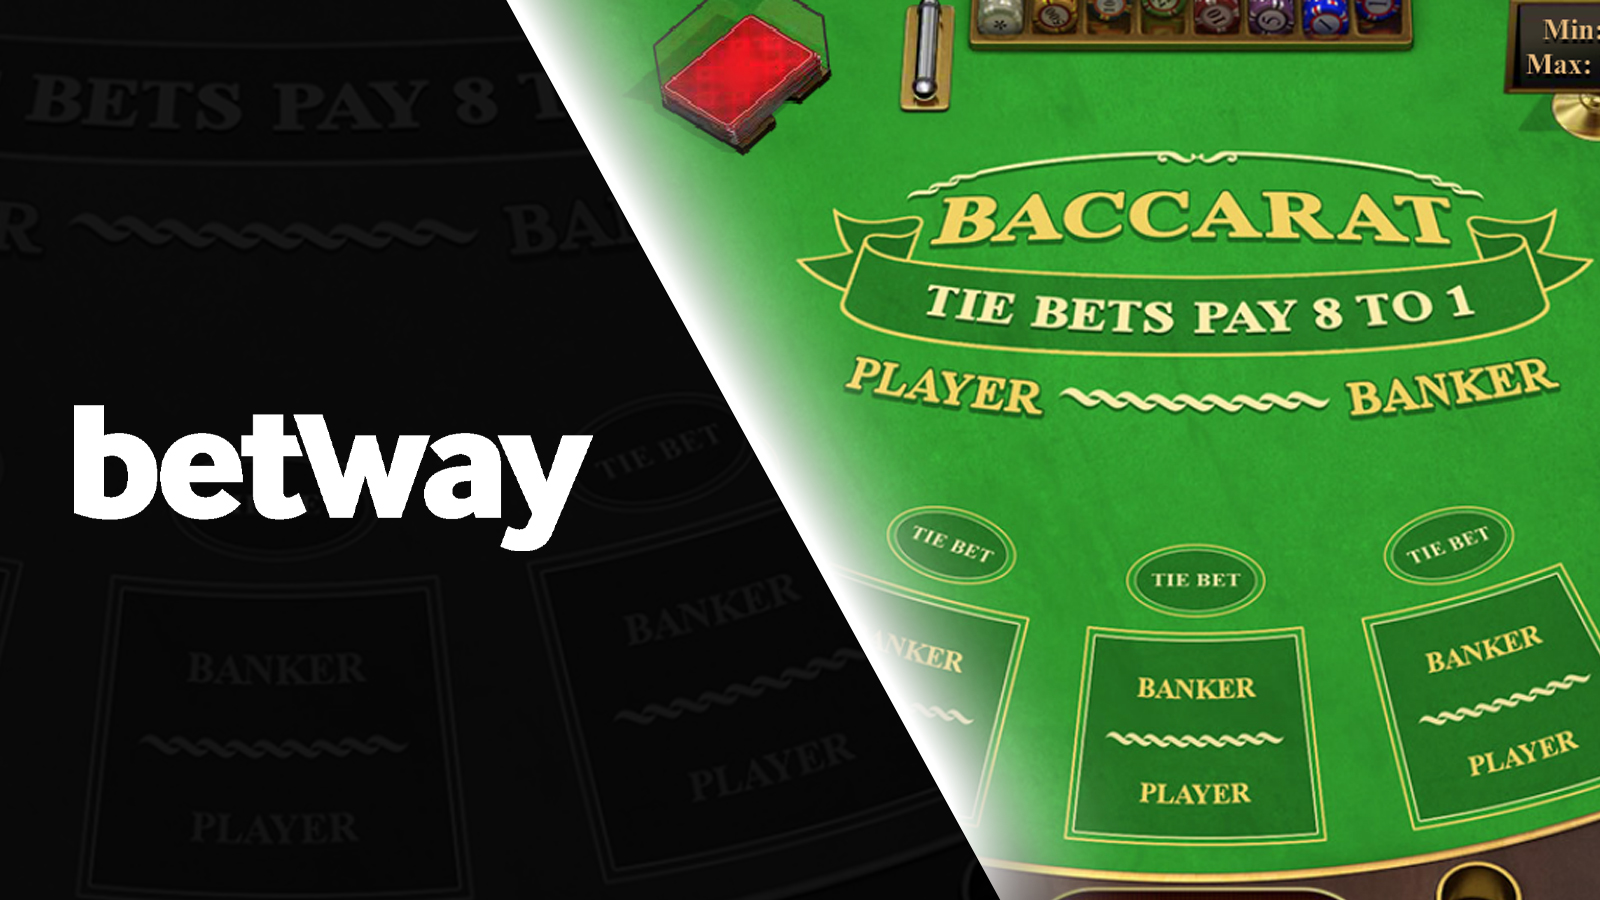 Try life baccarat at the Betway casino.